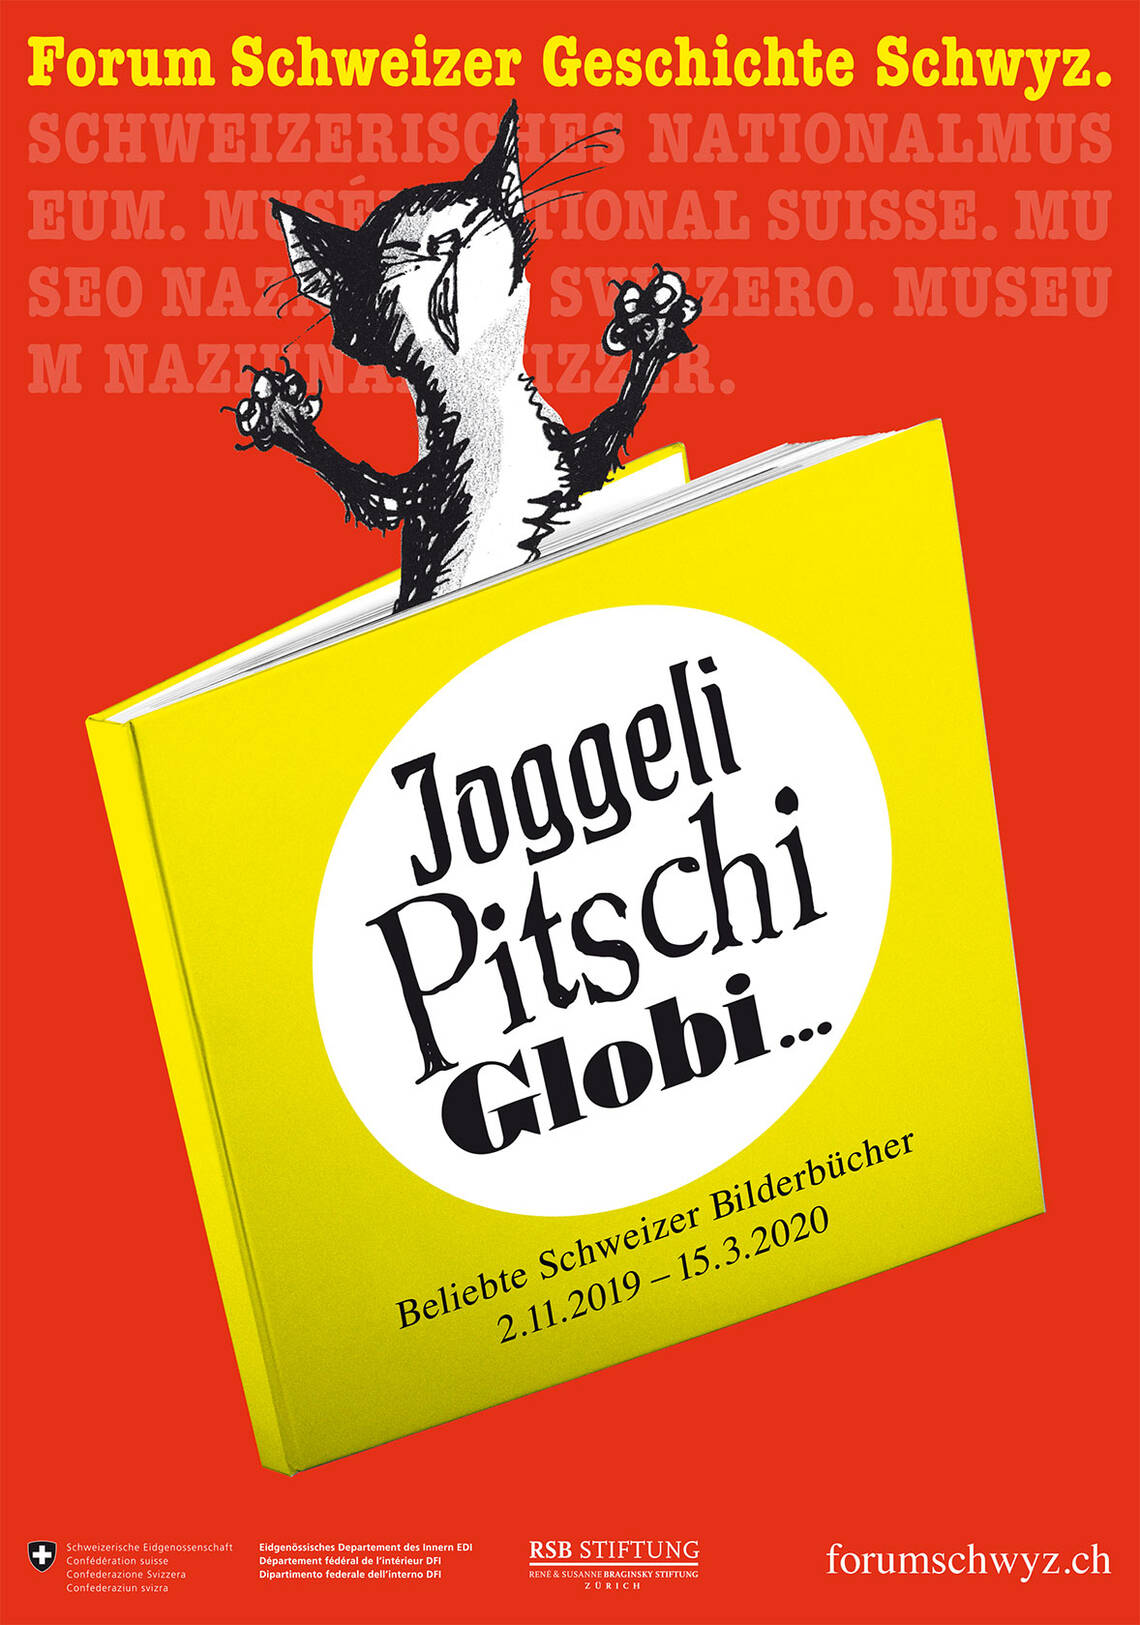 Key visual of the exhibition "Joggeli, Pitschi, Globi... popular Swiss children's books" it shows a cat trapped in a book in drawn form